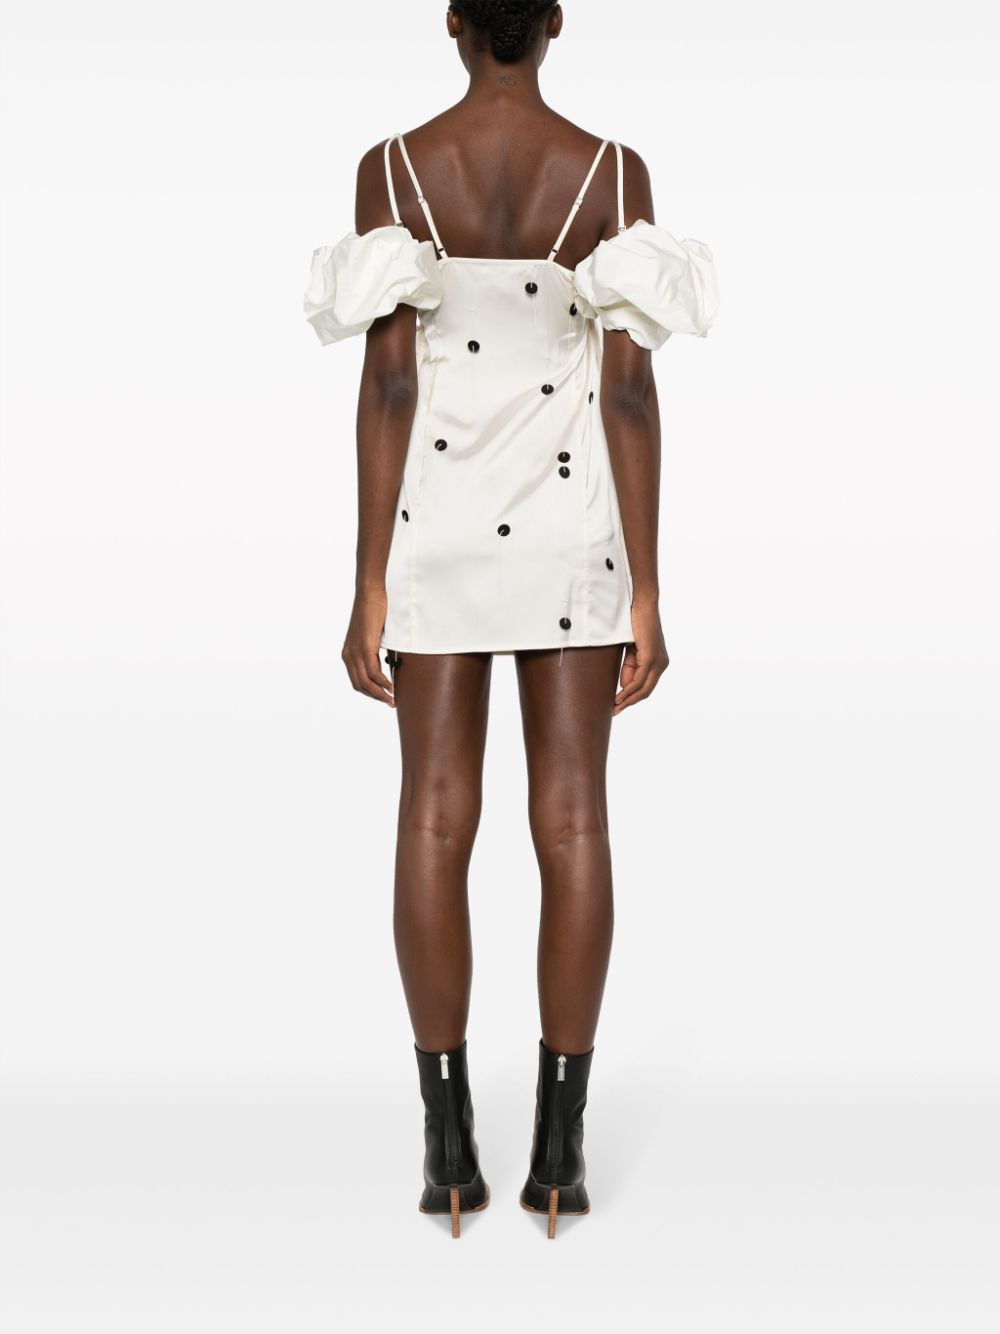 JACQUEMUS Off-White Embroidered Mini Dress with Detachable Sleeves for Women